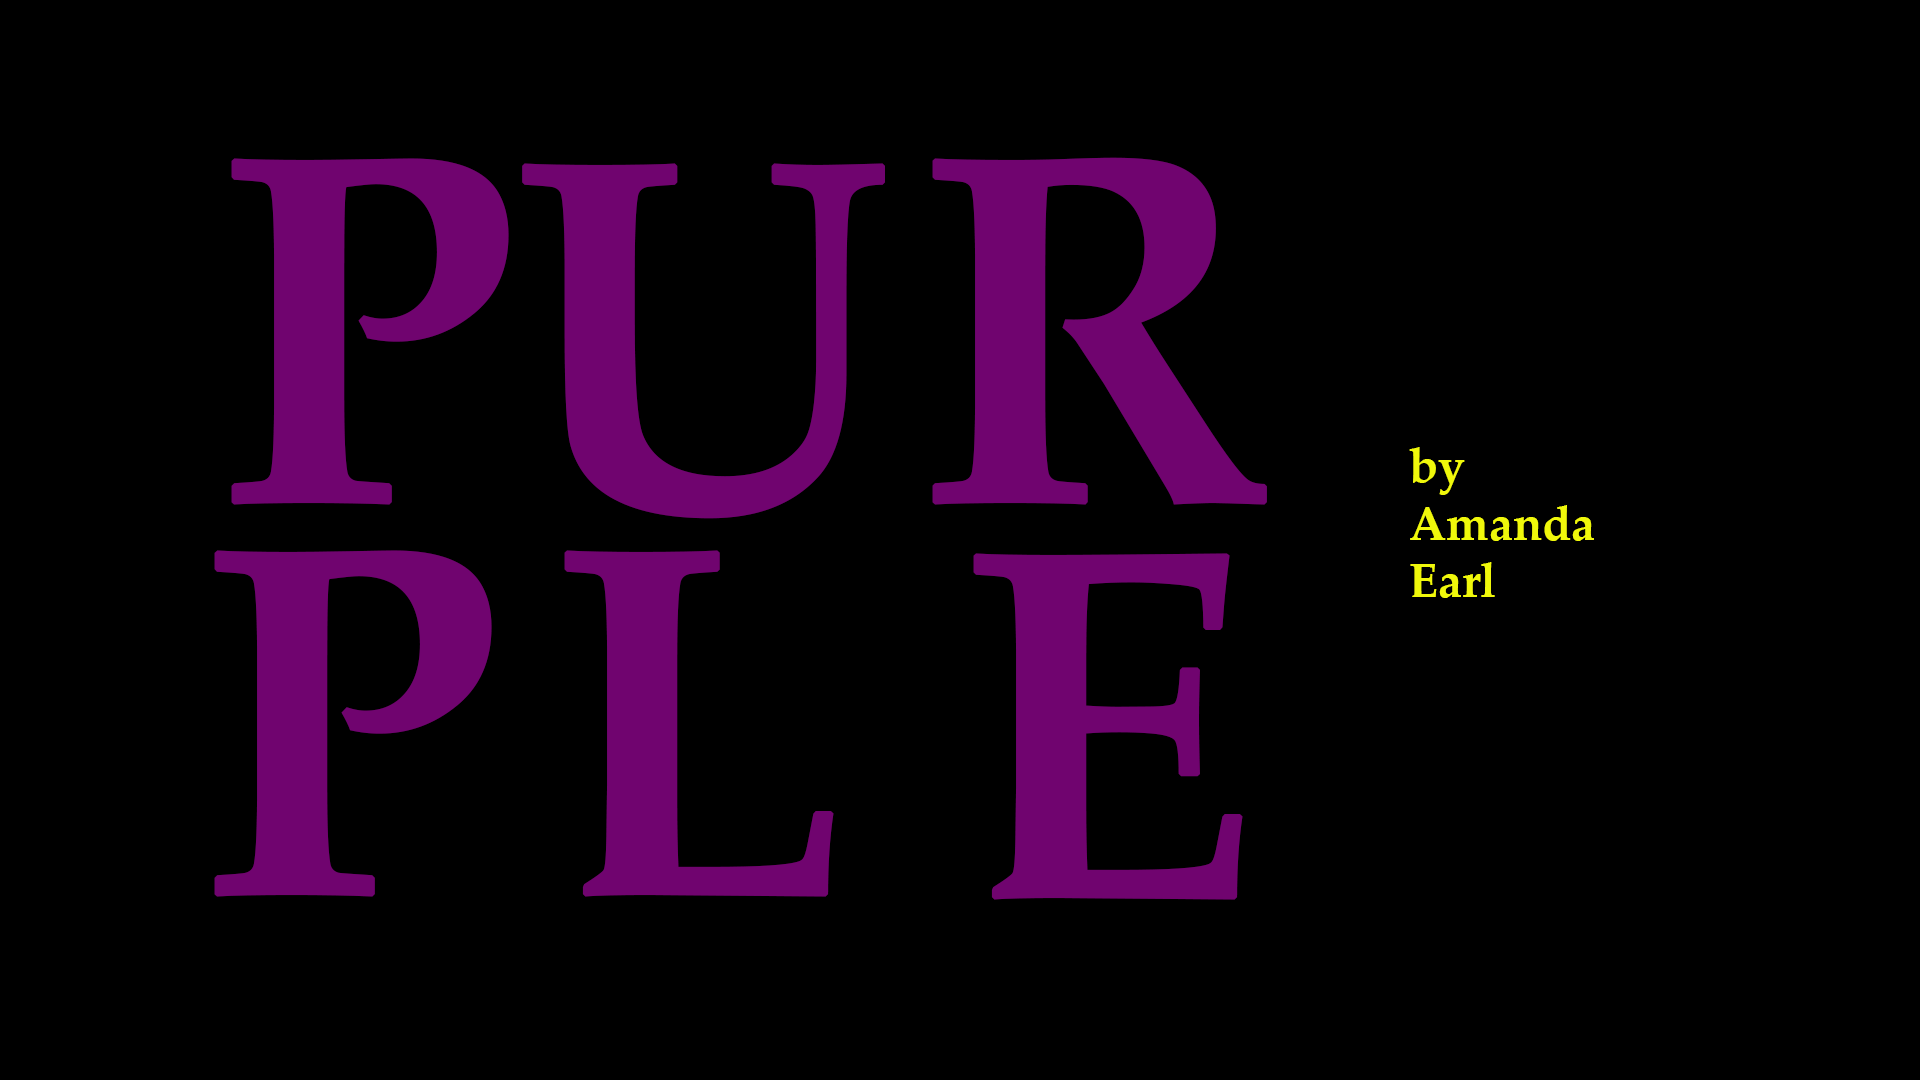 the word "purple" in purple on a black background